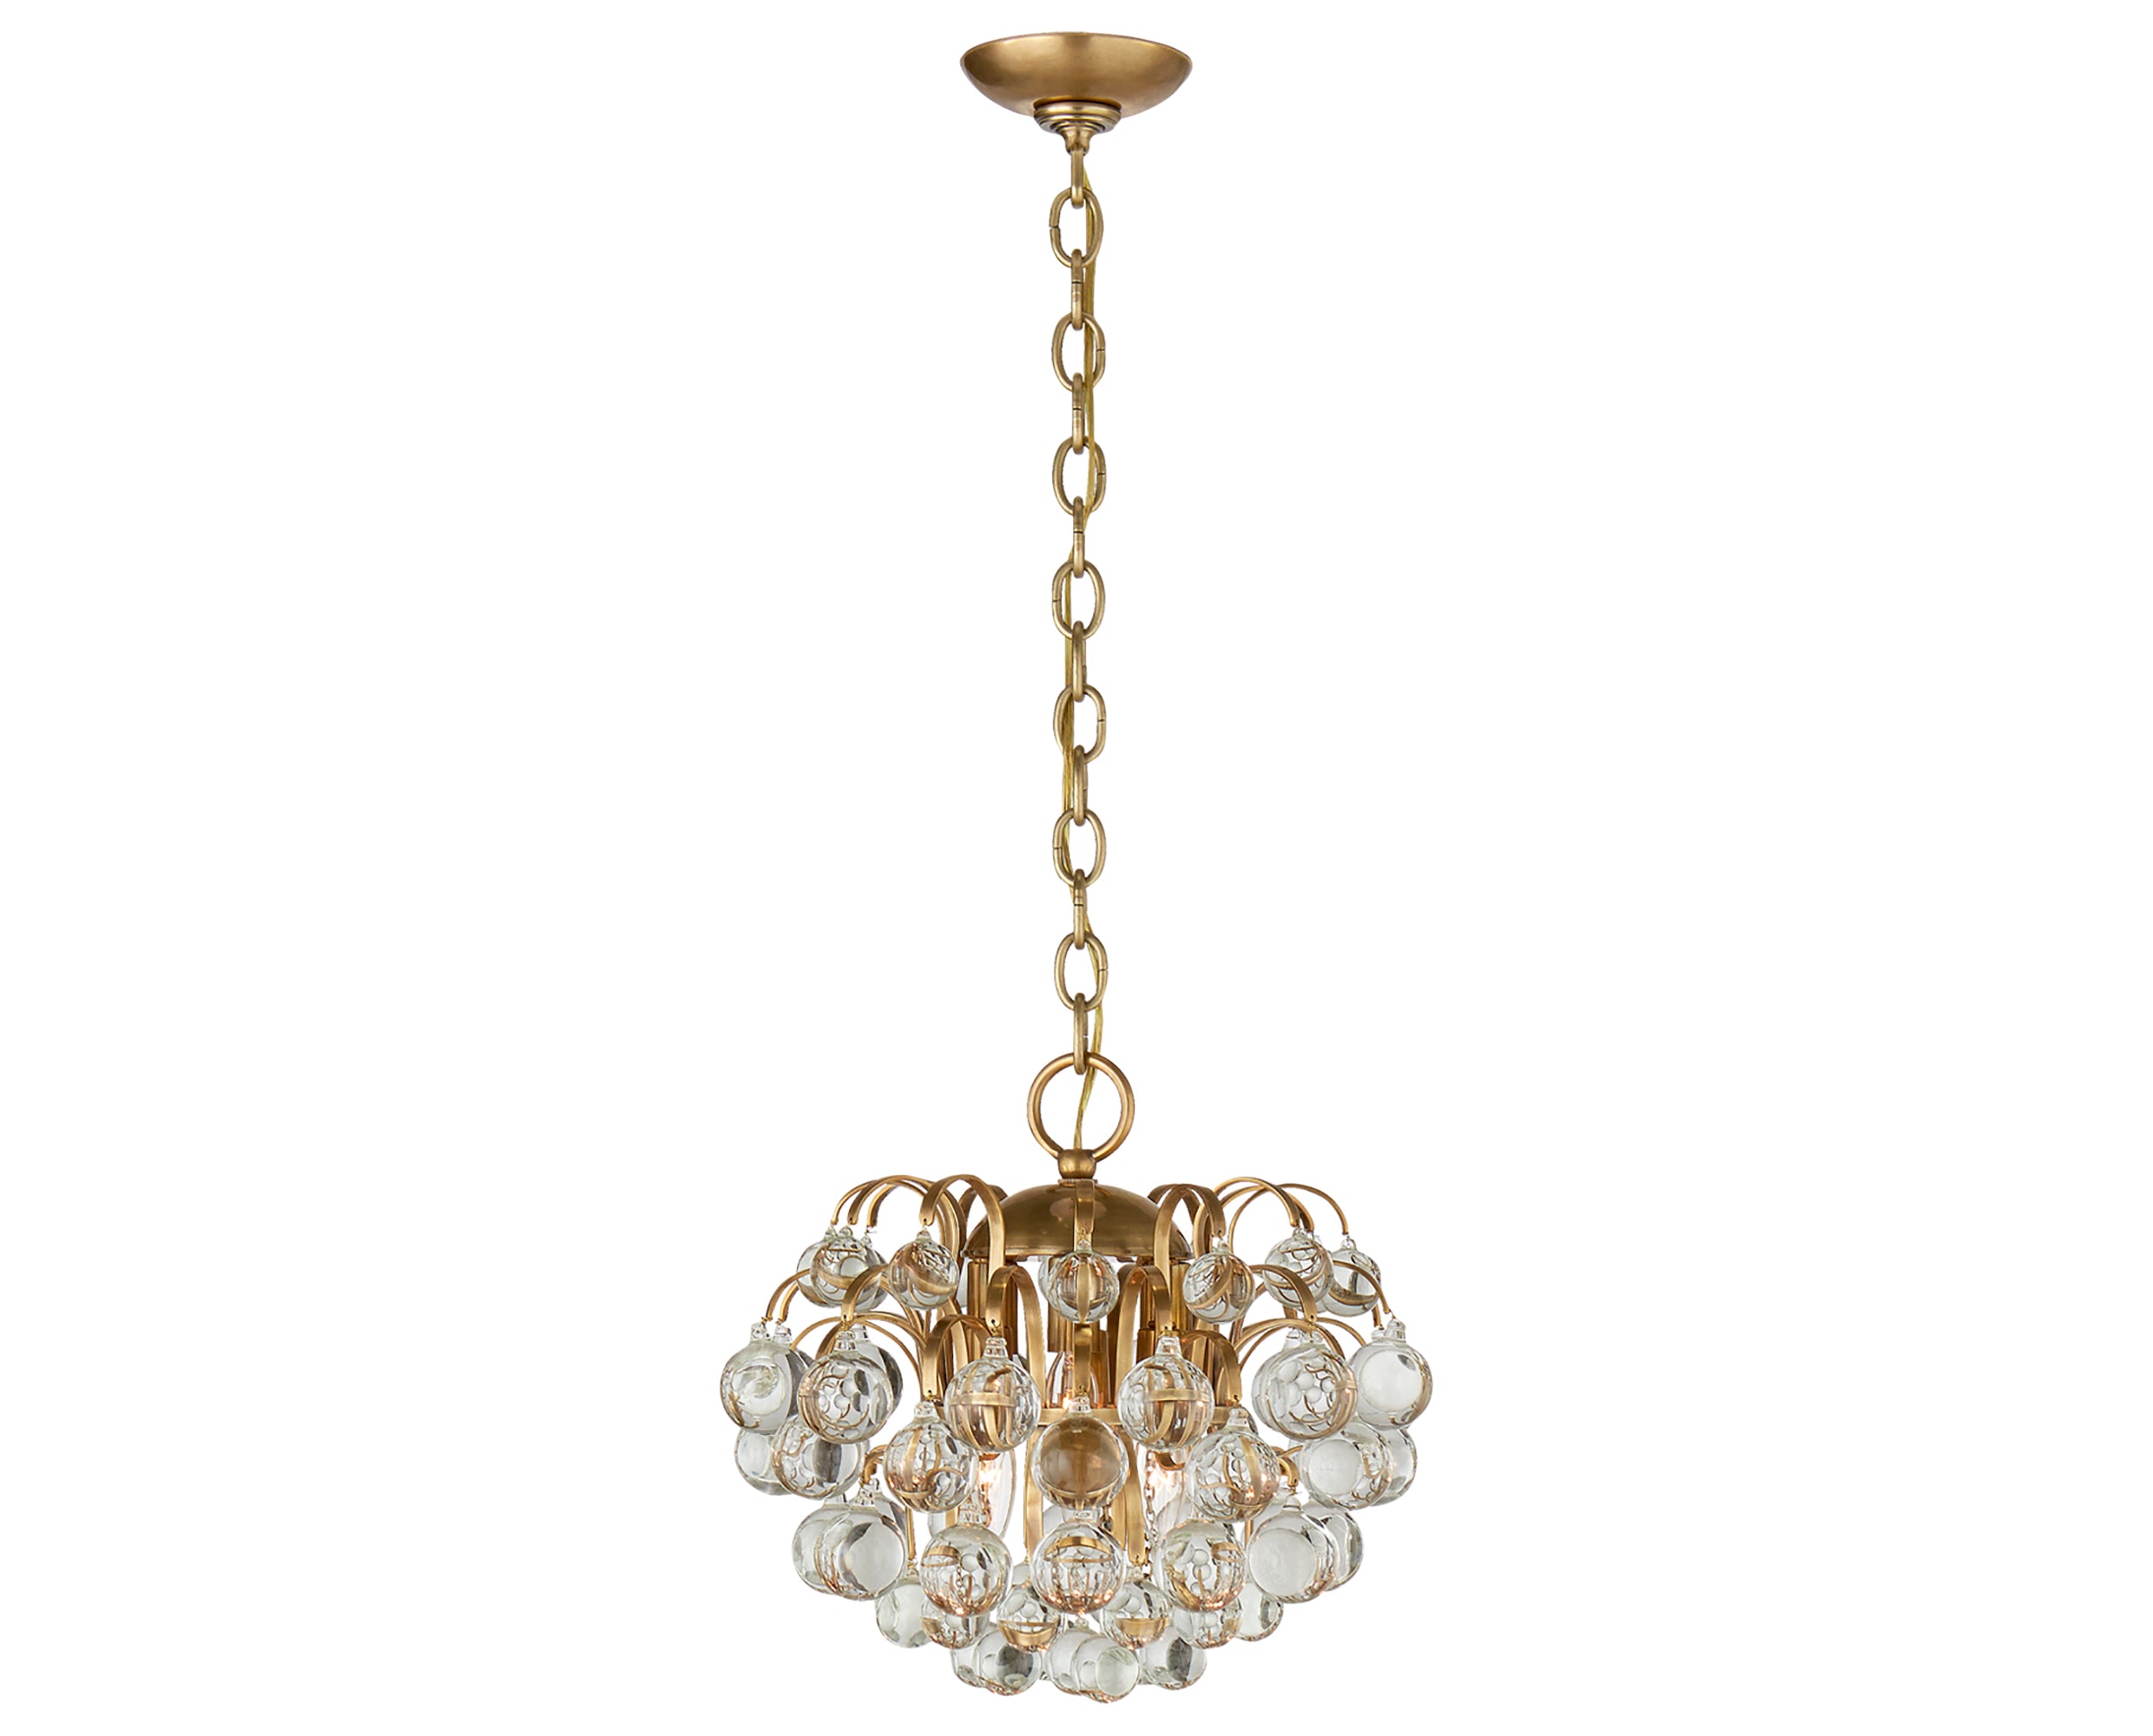 Hand-Rubbed Antique Brass &amp; Crystal Glass | Bellvale Small Chandelier | Valley Ridge Furniture